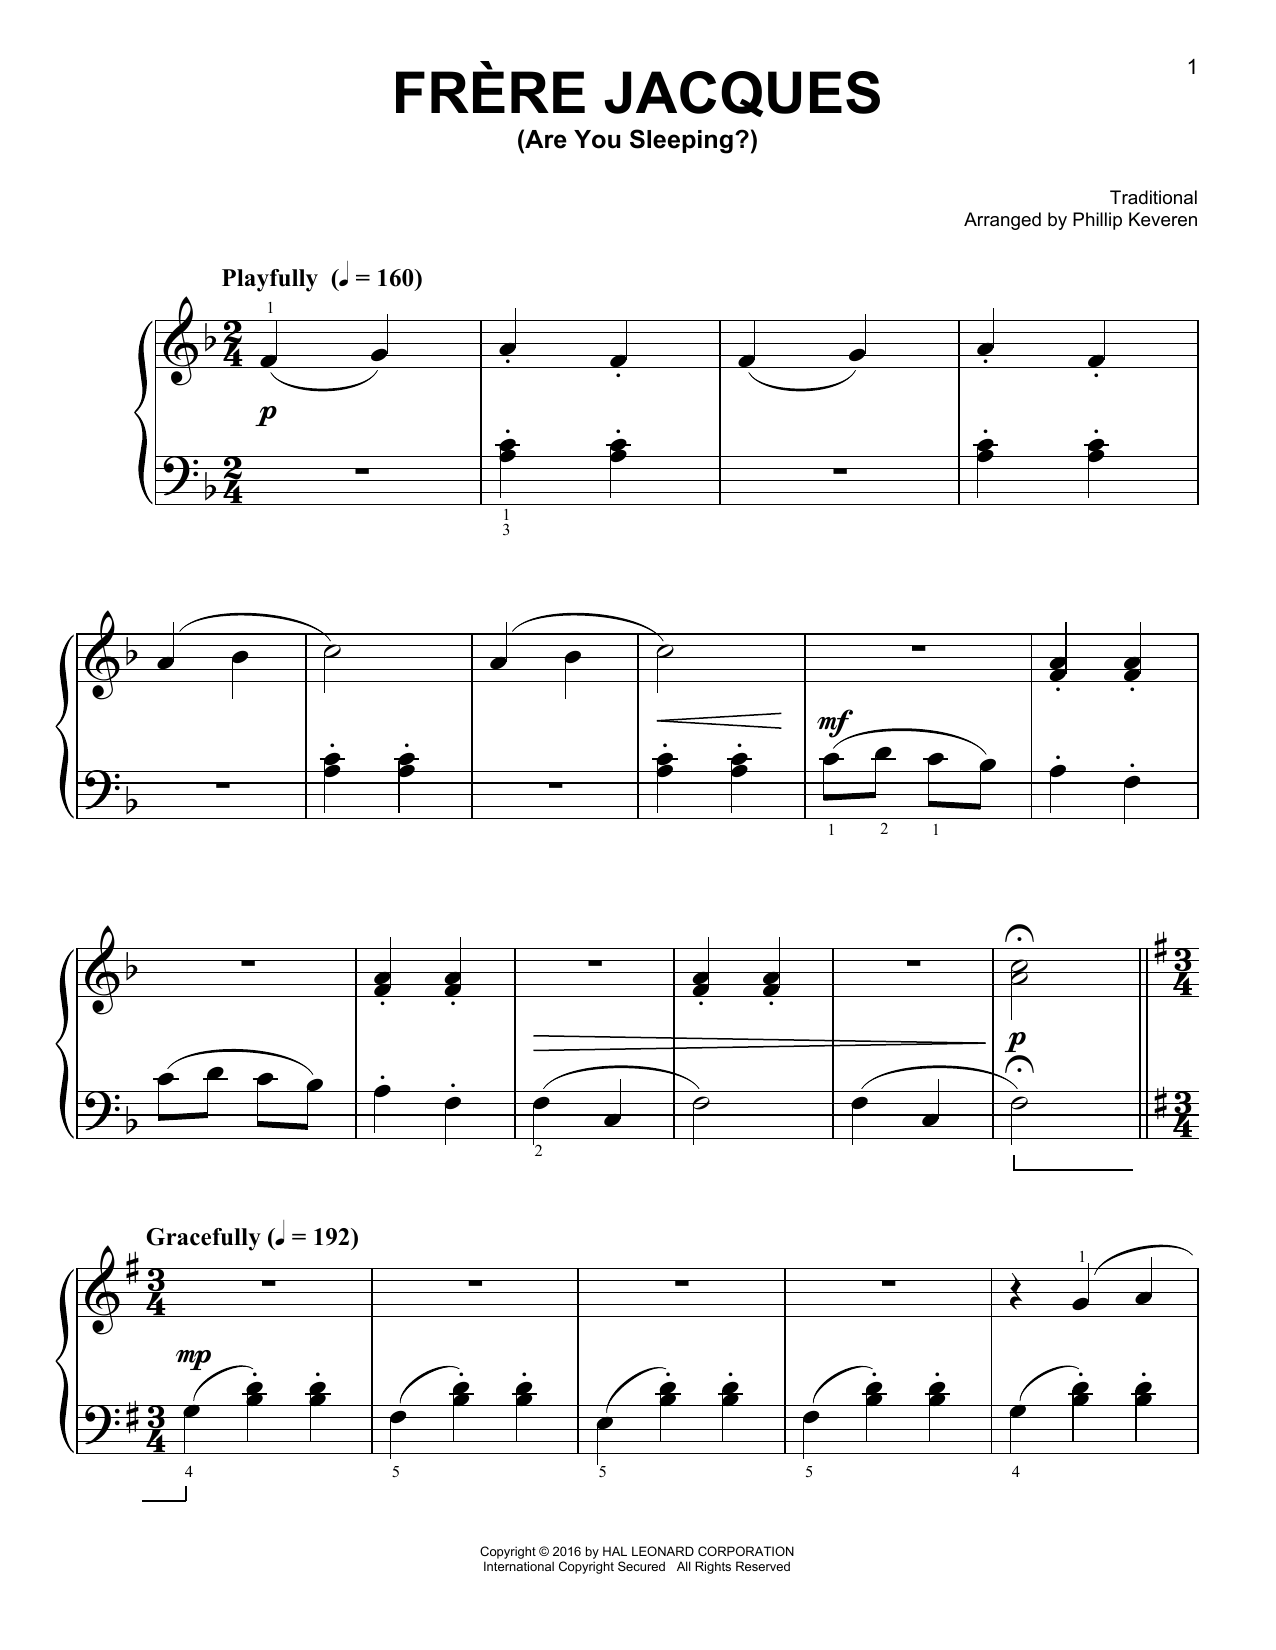 Download Traditional Frere Jacques Sheet Music